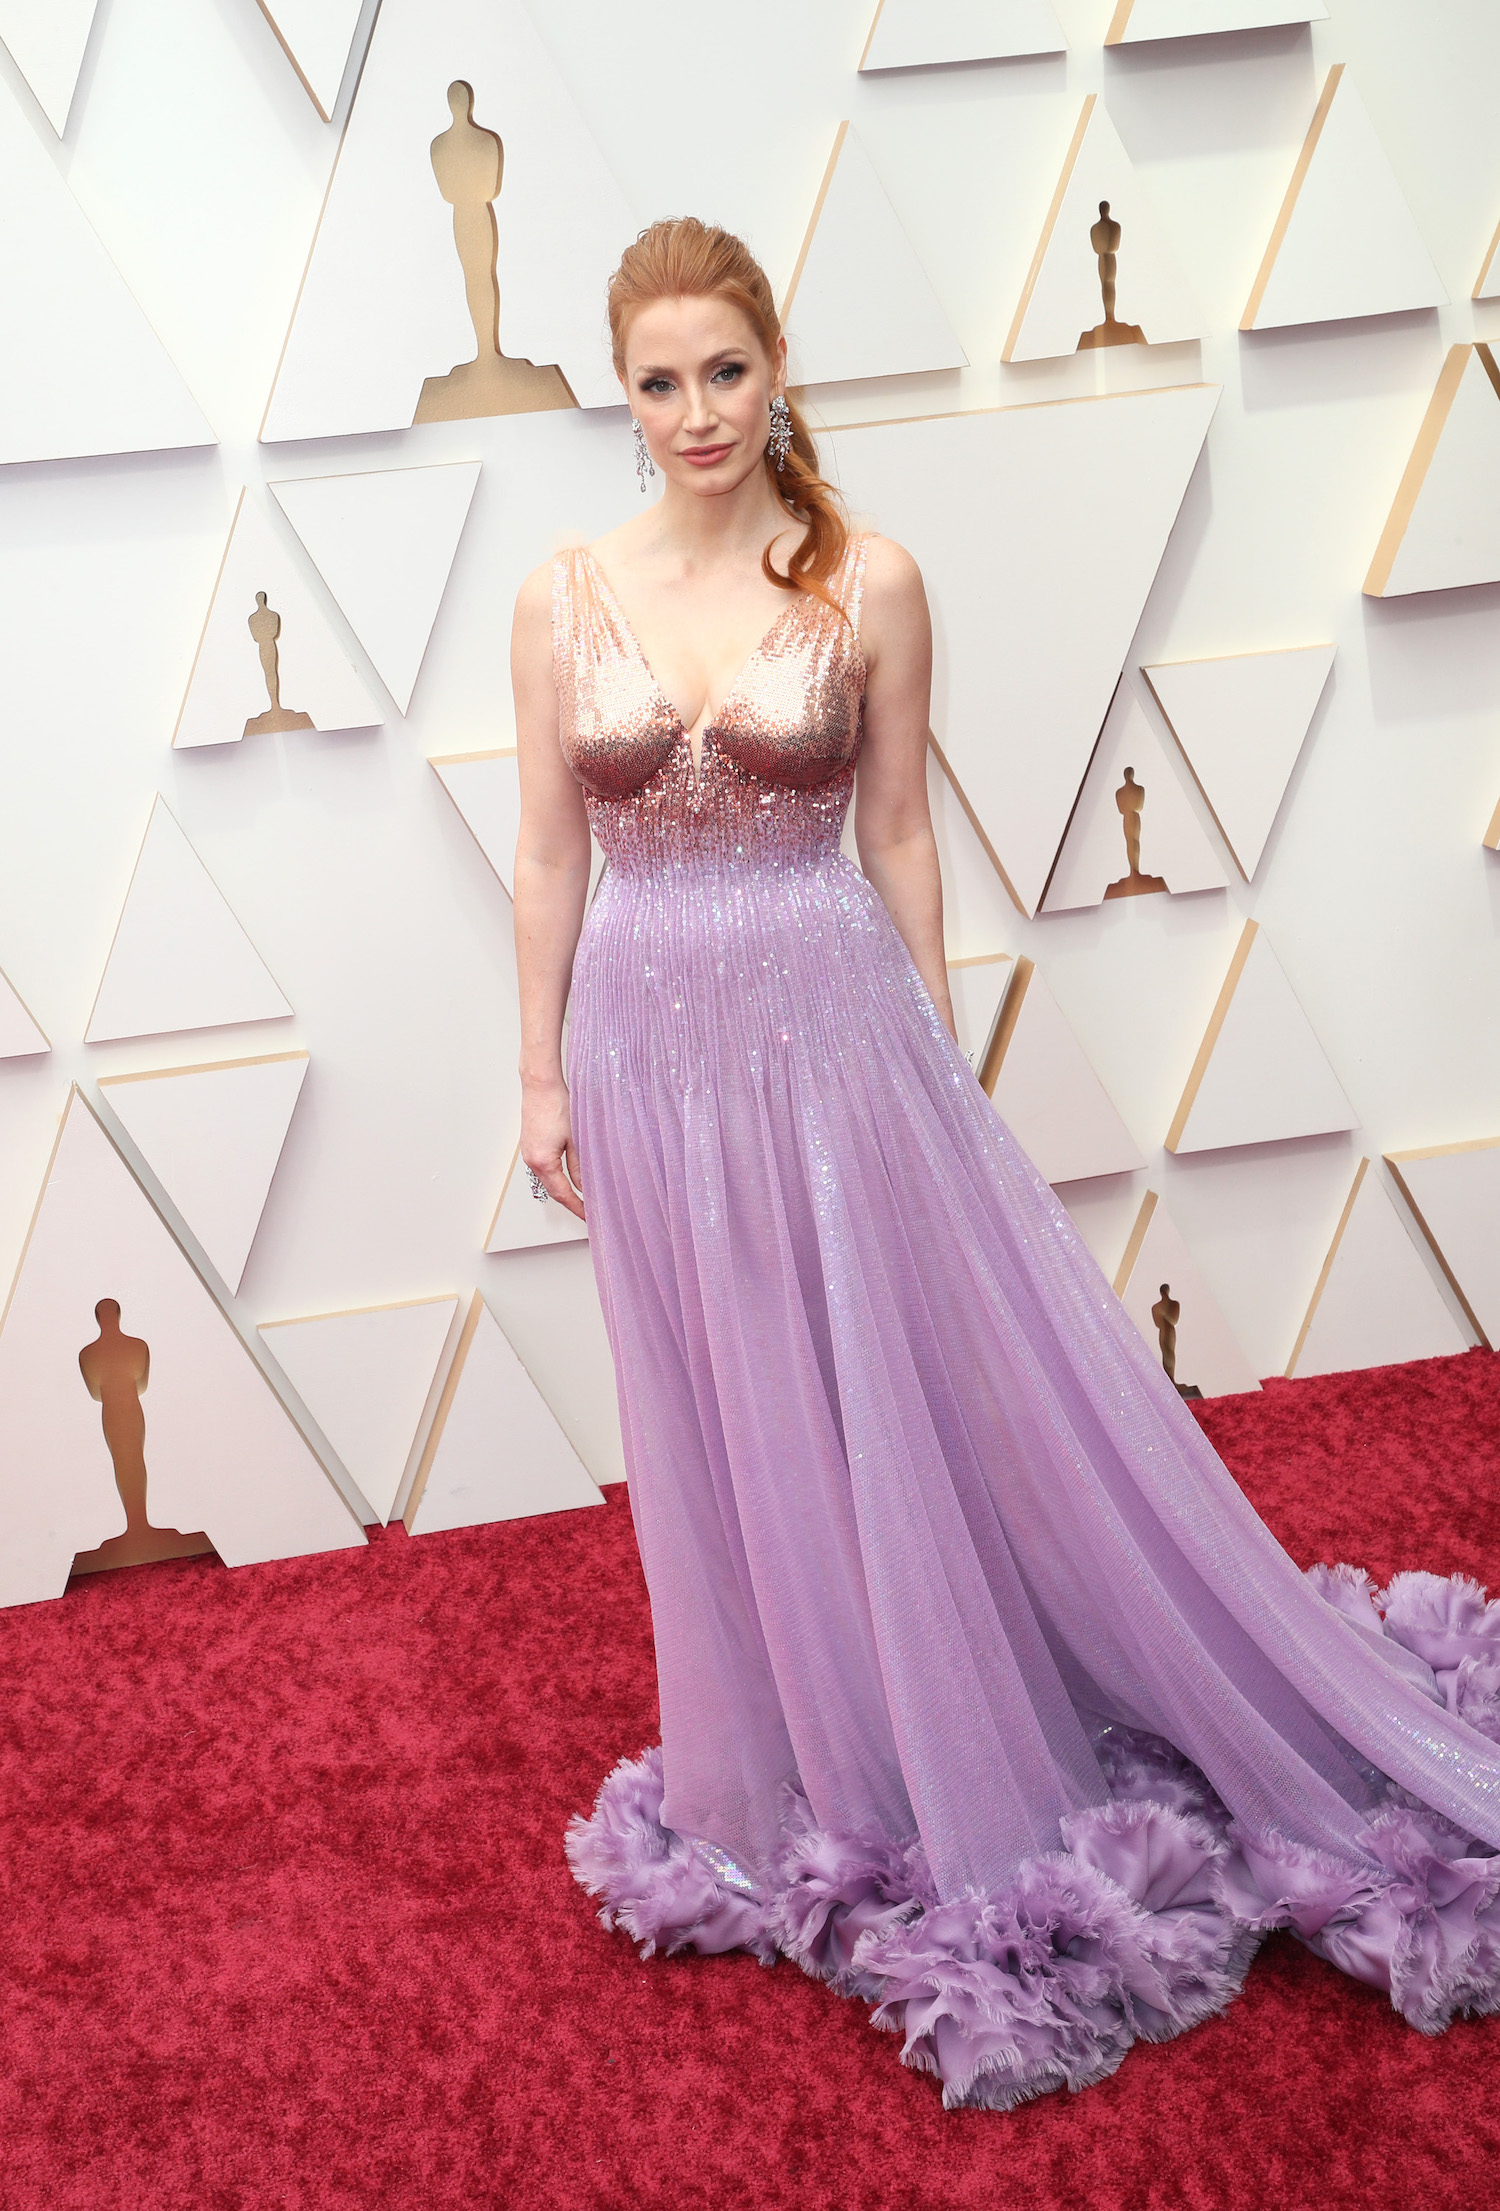 Jessica Chastain at the Oscars 2022